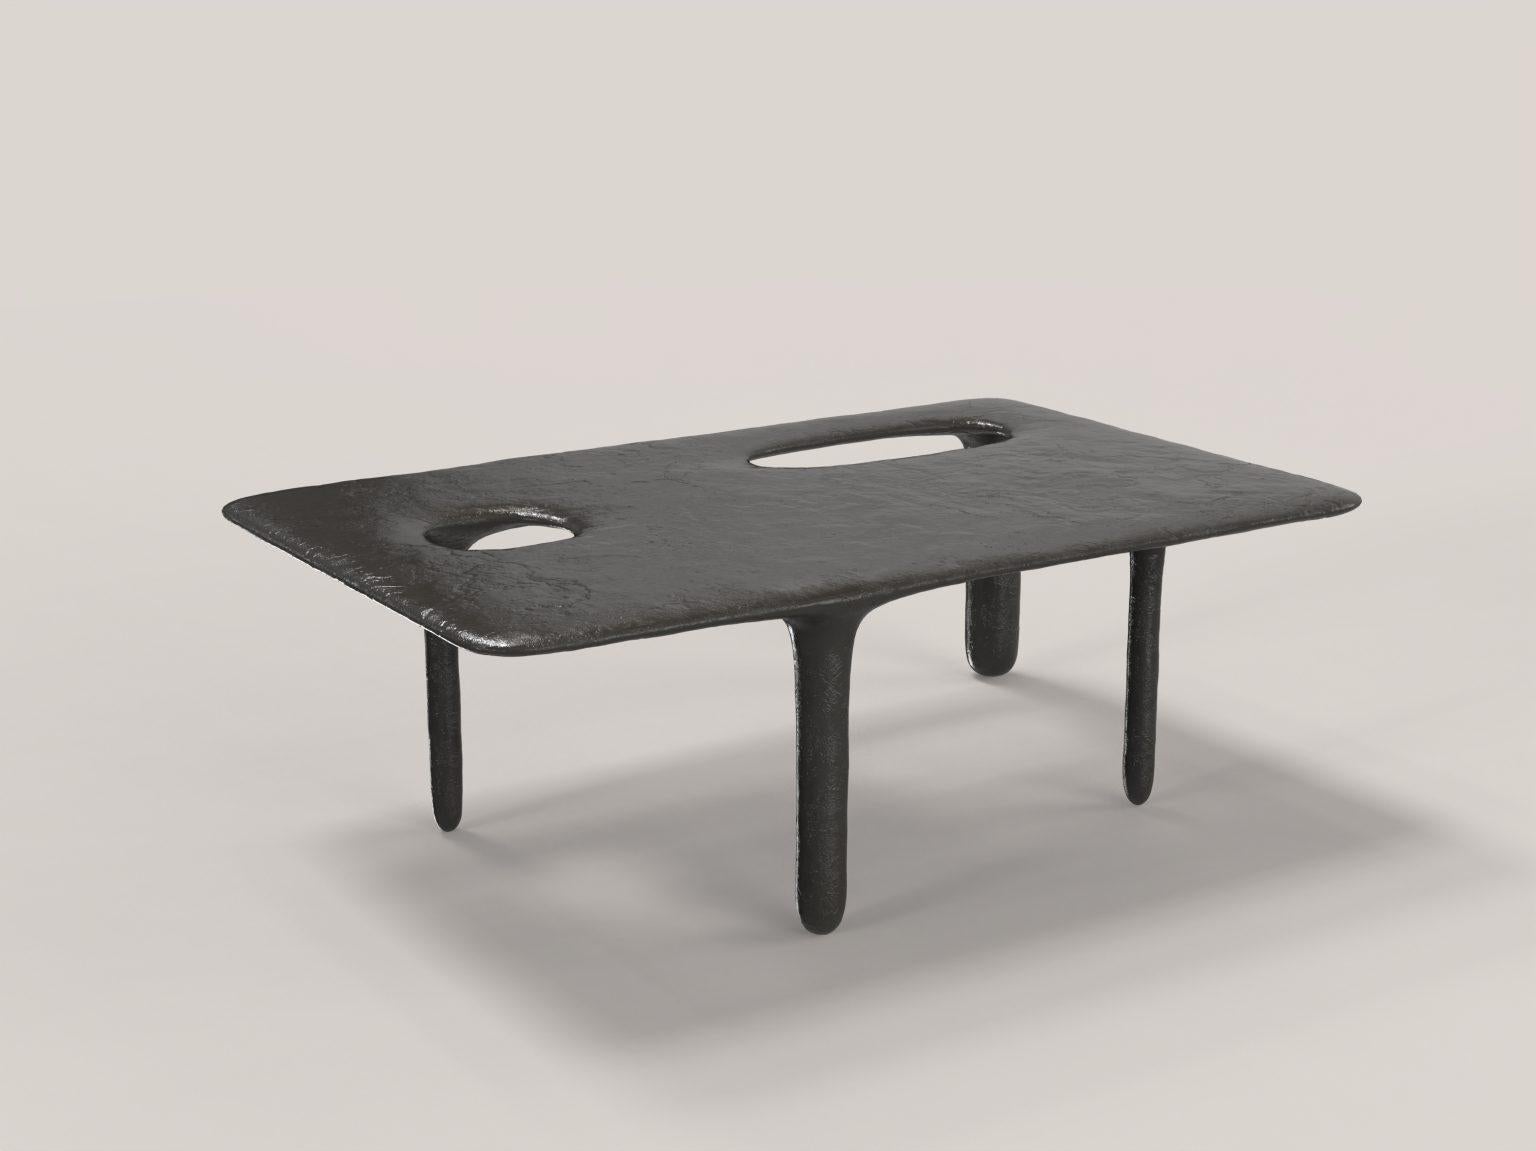 Oasi V2 Low table by Edizione limitata.
Limited Edition of 15 + 3 pieces. Signed and numbered.
Dimensions: D 50 x W 80 x H 28 cm.
Materials: cast bronze.

Edizione Limitata, that is to say “Limited Edition”, is a brand promoting and developing